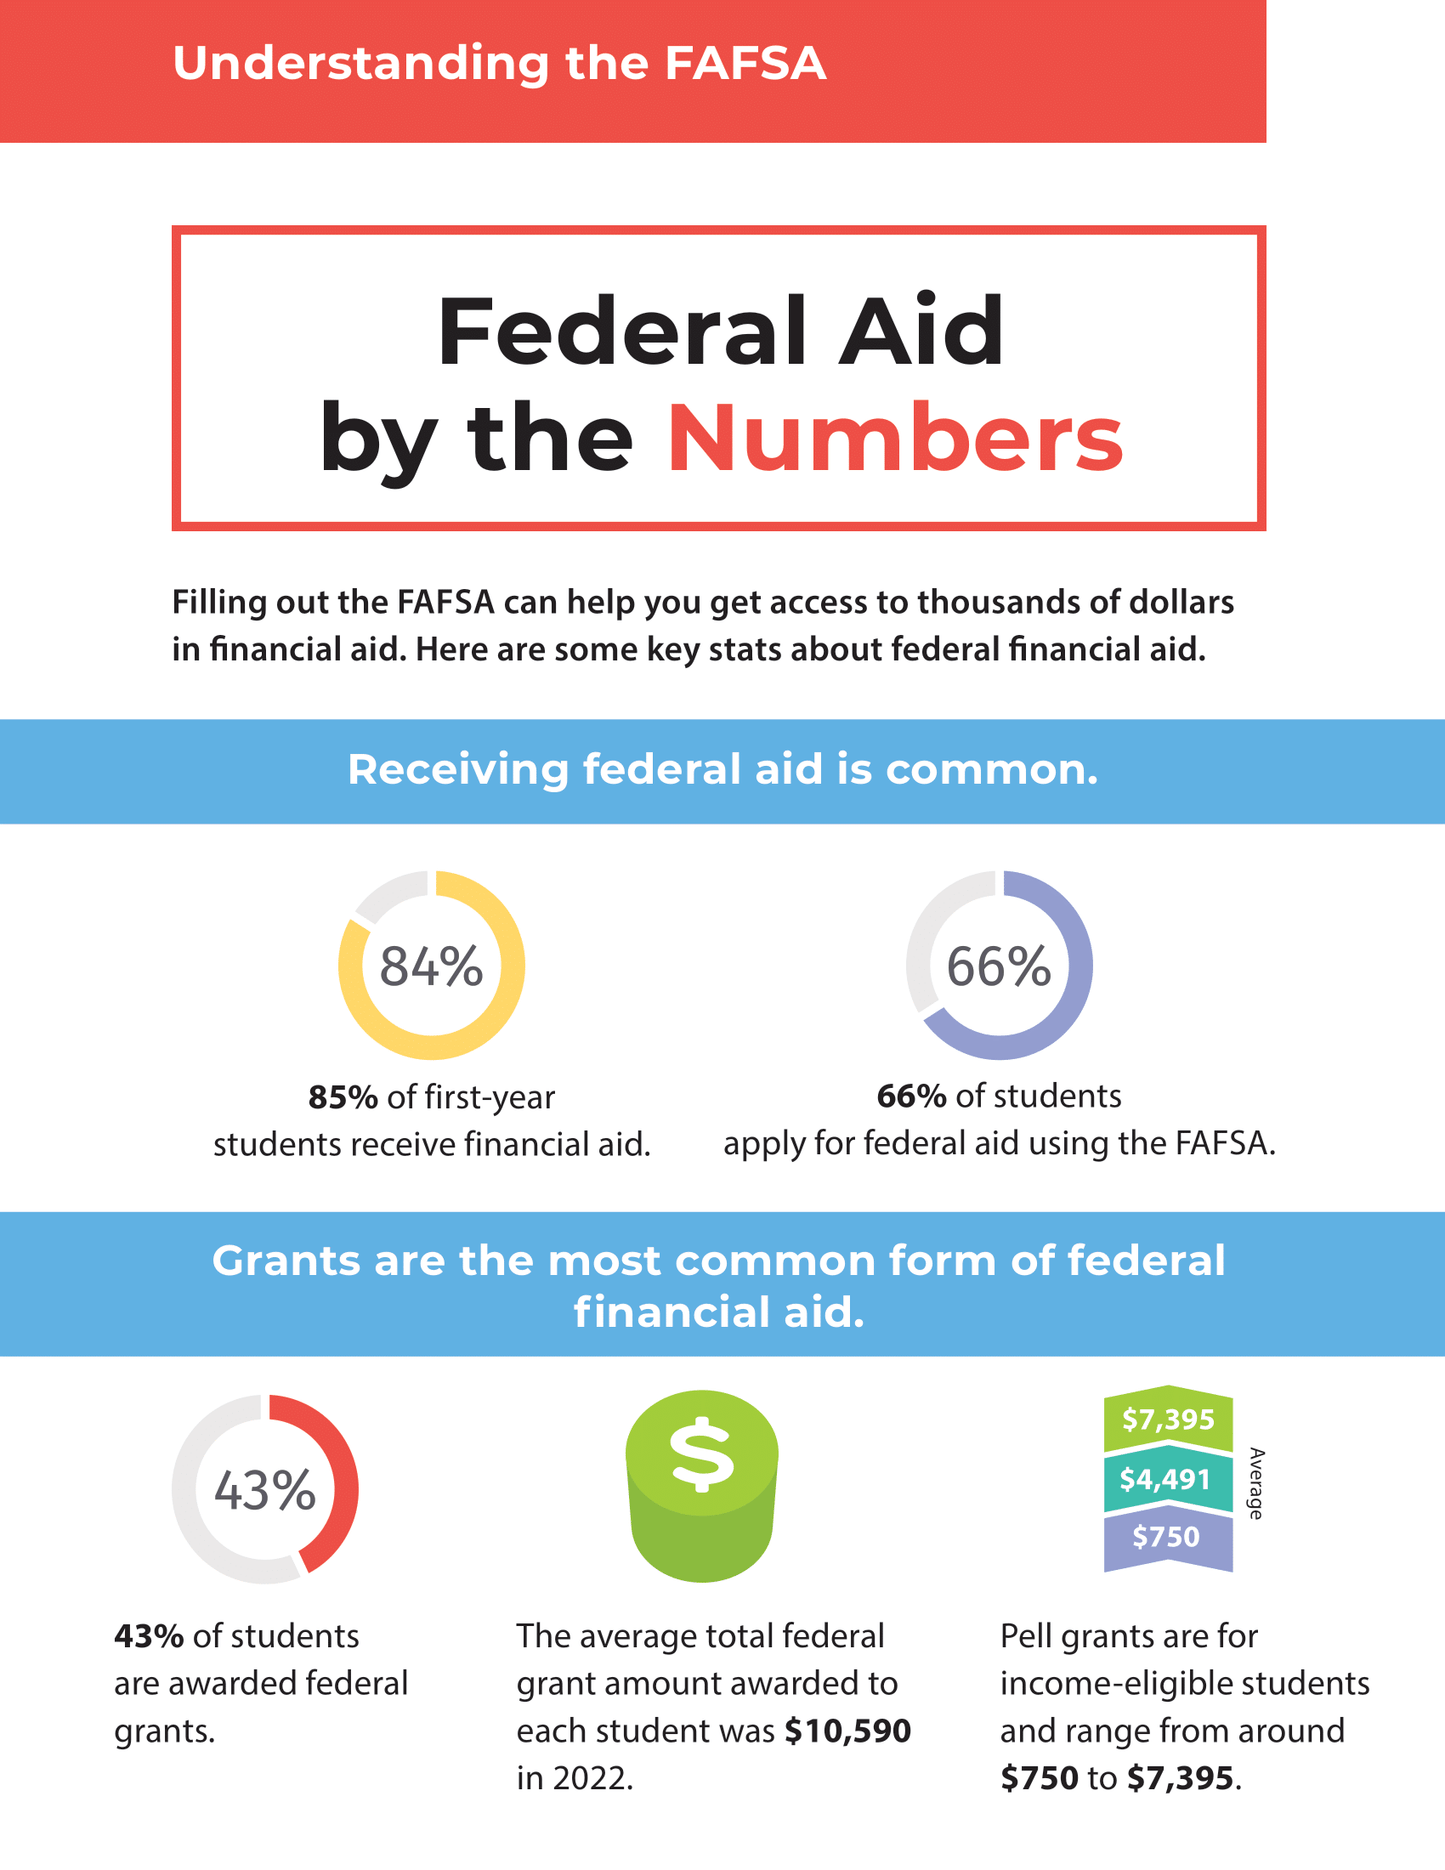 Federal Aid by the Numbers